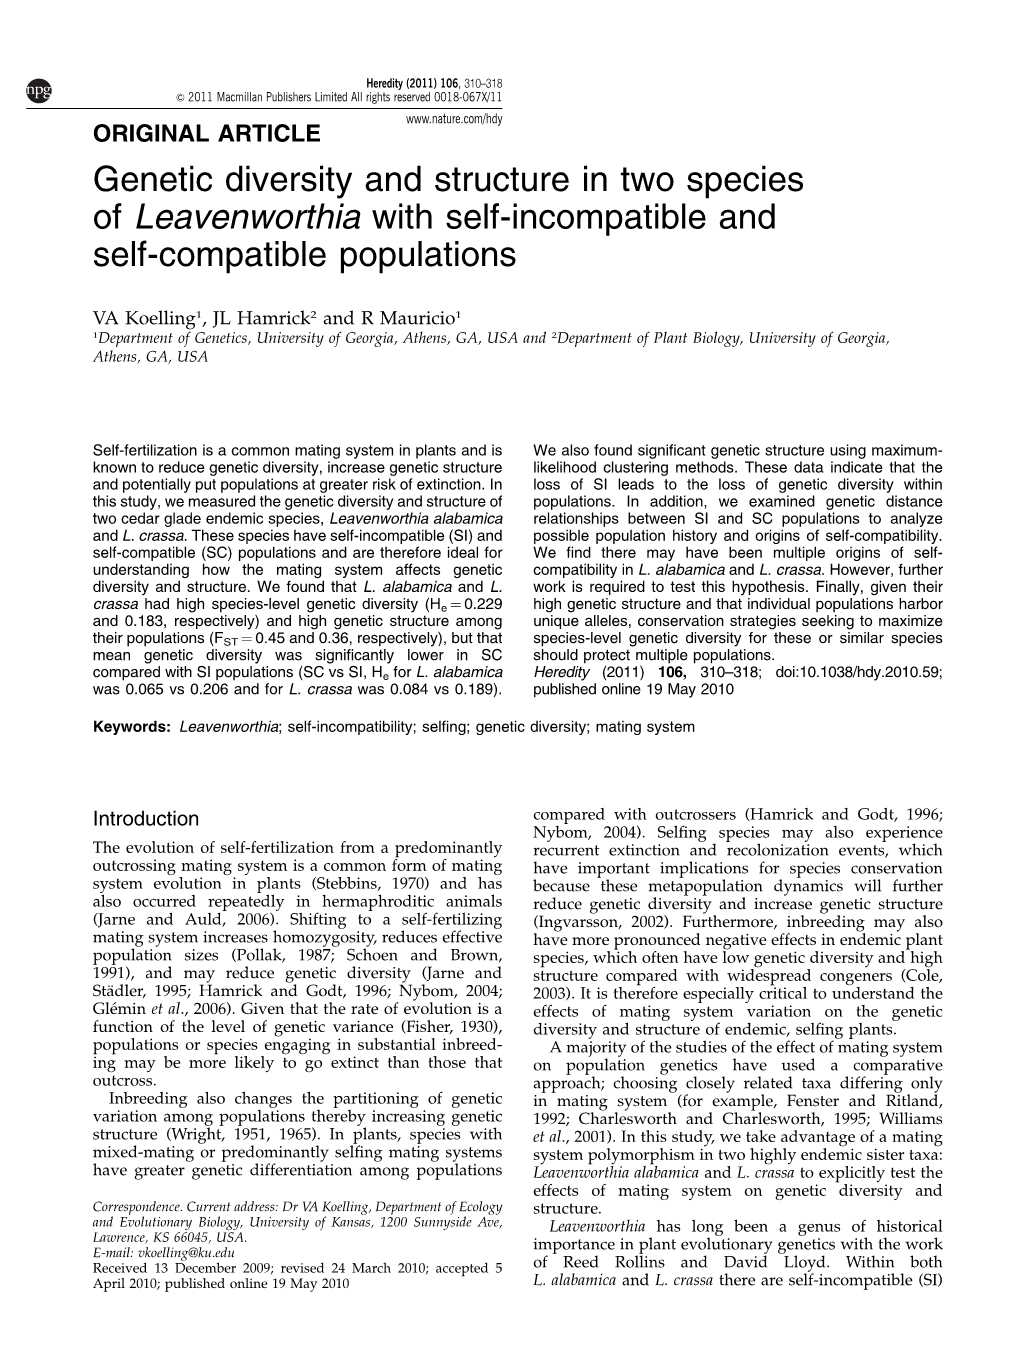 Genetic Diversity and Structure in Two Species of Leavenworthia with Self-Incompatible and Self-Compatible Populations